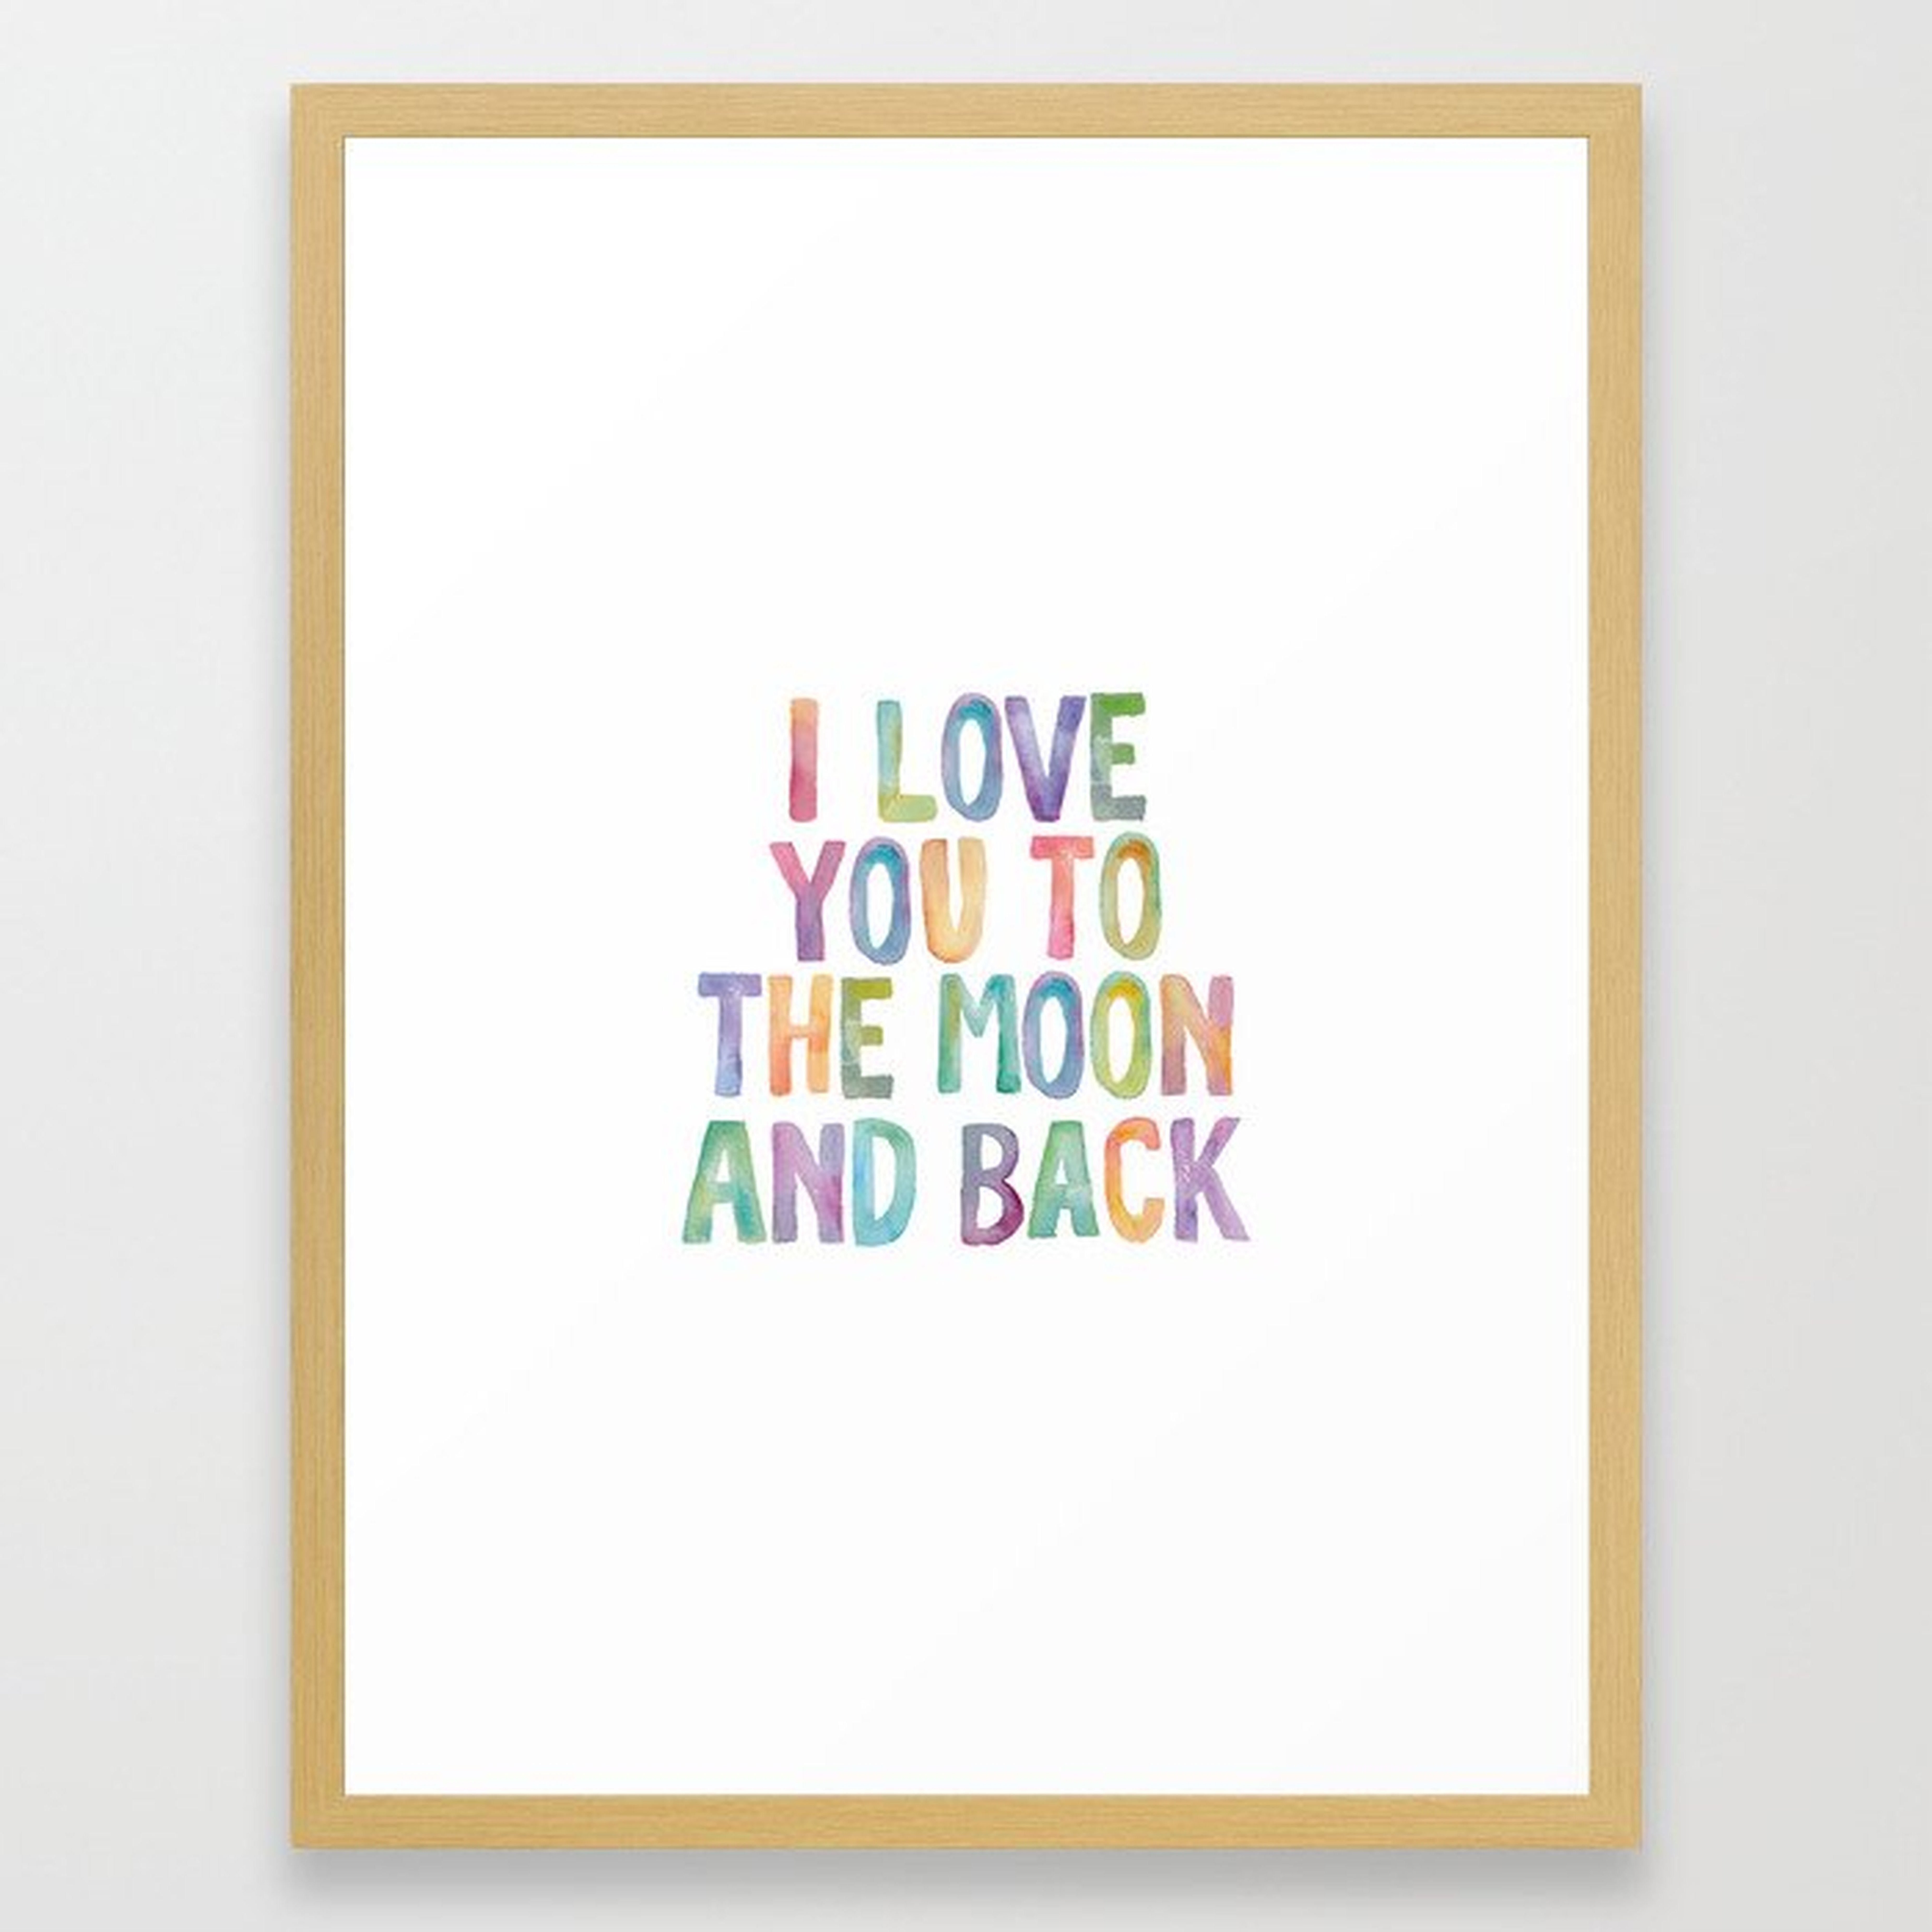 I Love You To The Moon and Back Watercolor Rainbow Design Inspirational Quote Typography Wall Decor Framed Art Print - Society6